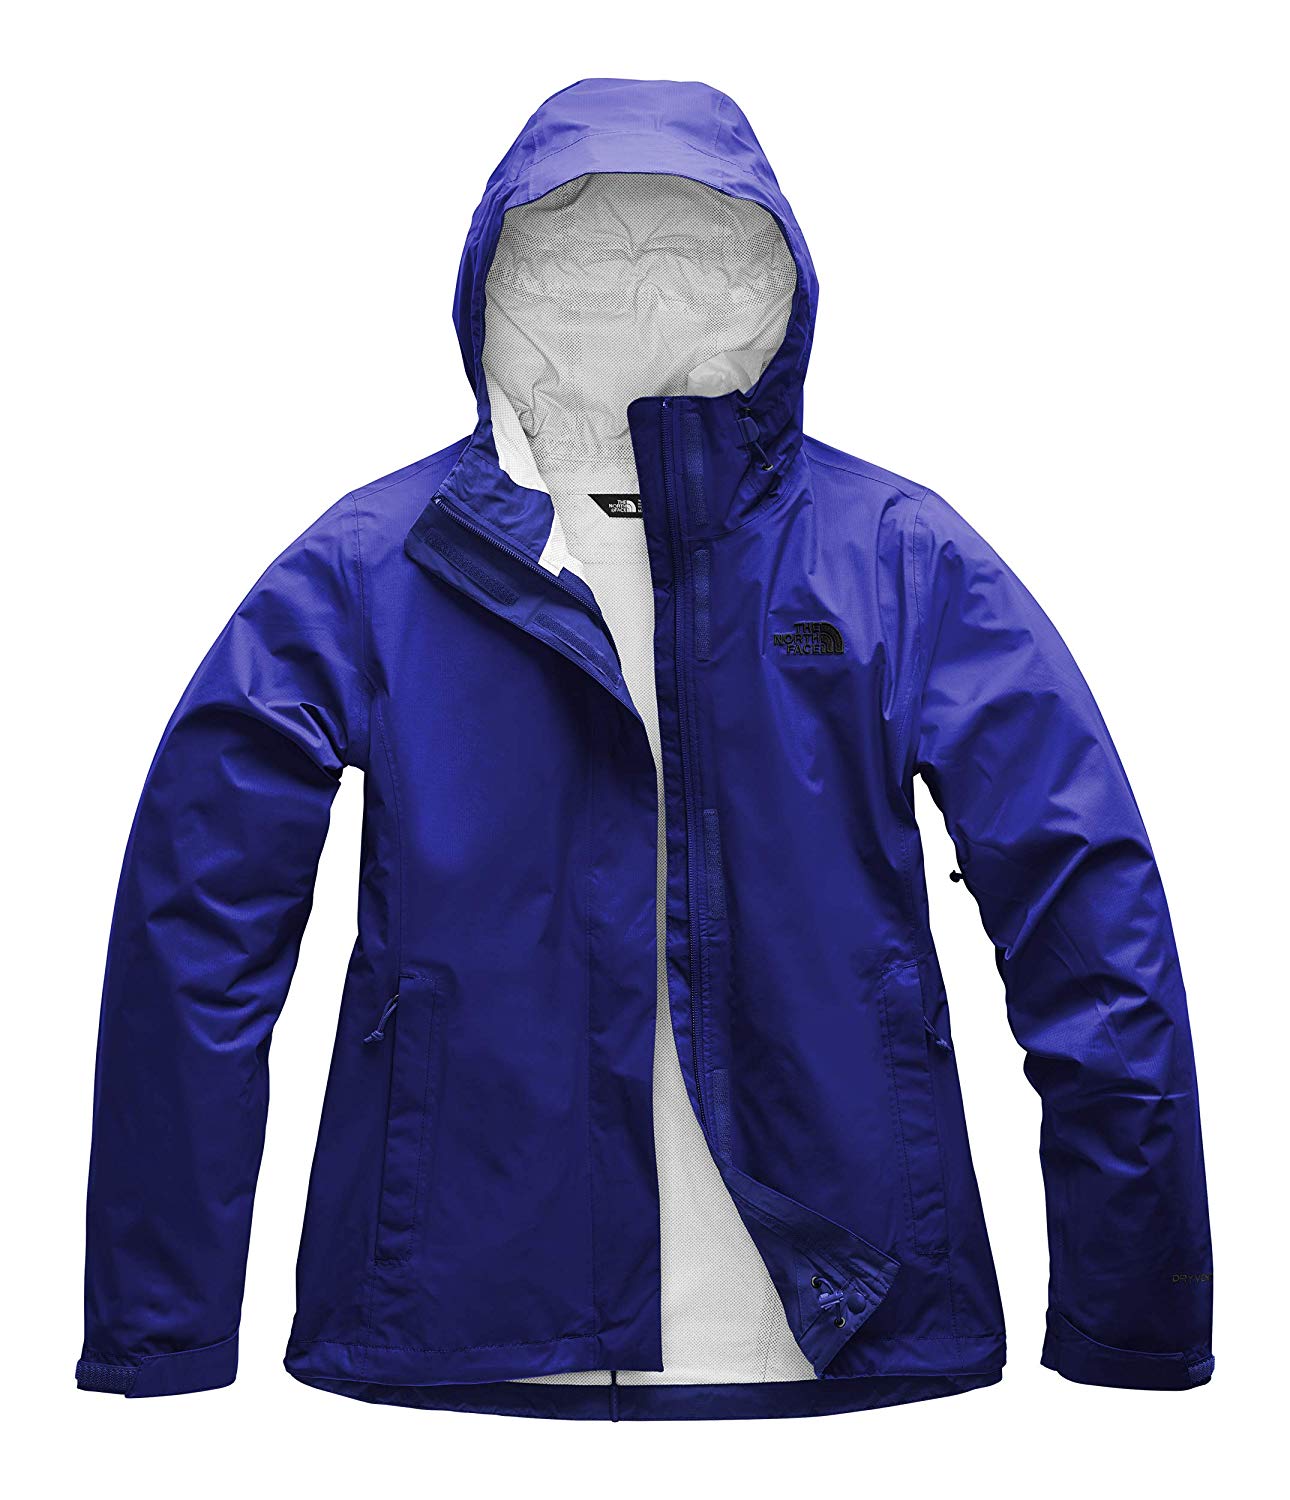 The North Face Women’s Venture 2 Jacket The North Face ktmart.vn 0